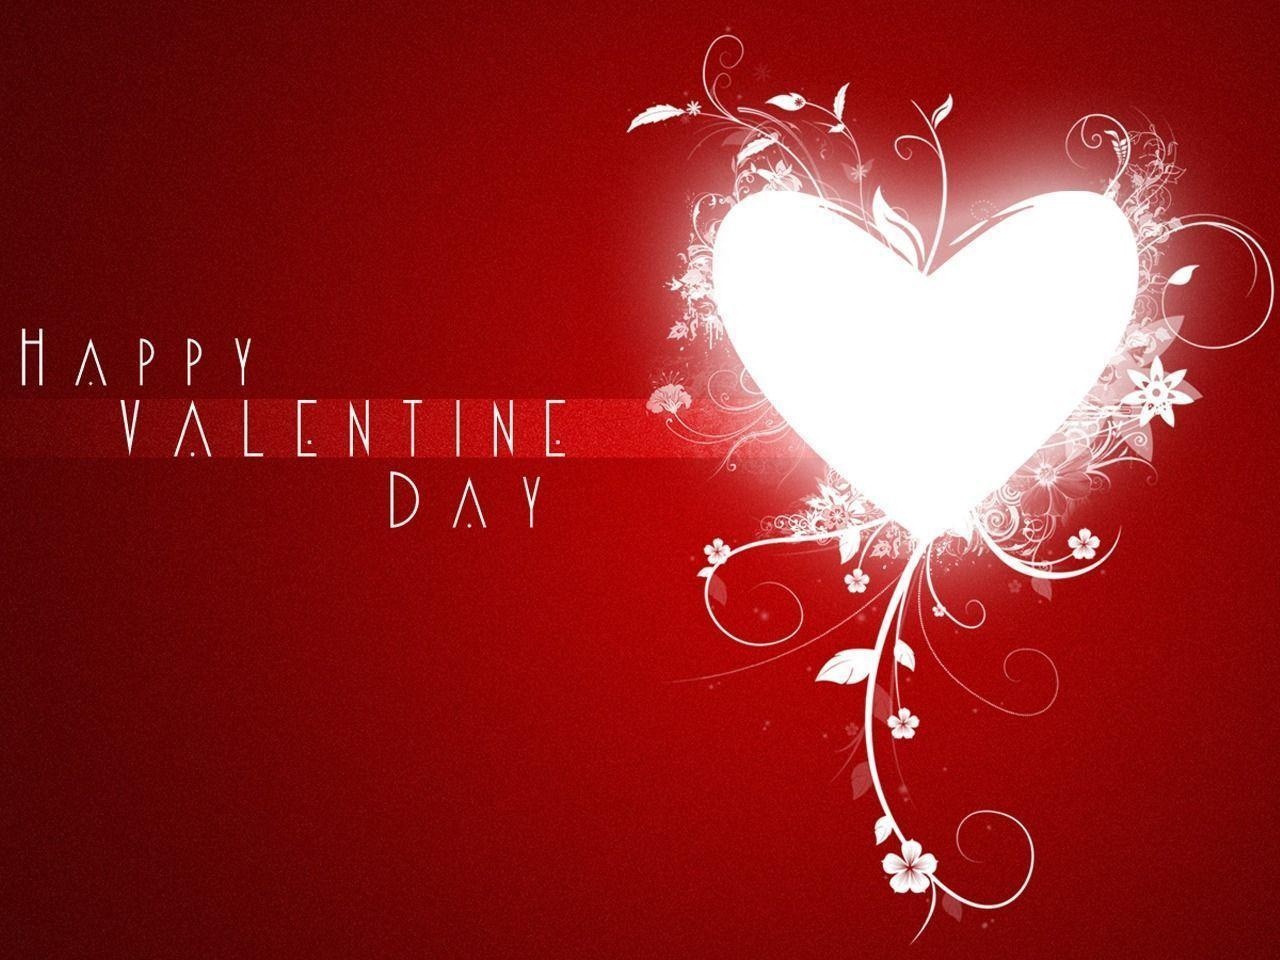 Happy Valentine&;s Day Image, SMS, Wishes, Quotes, Greetings